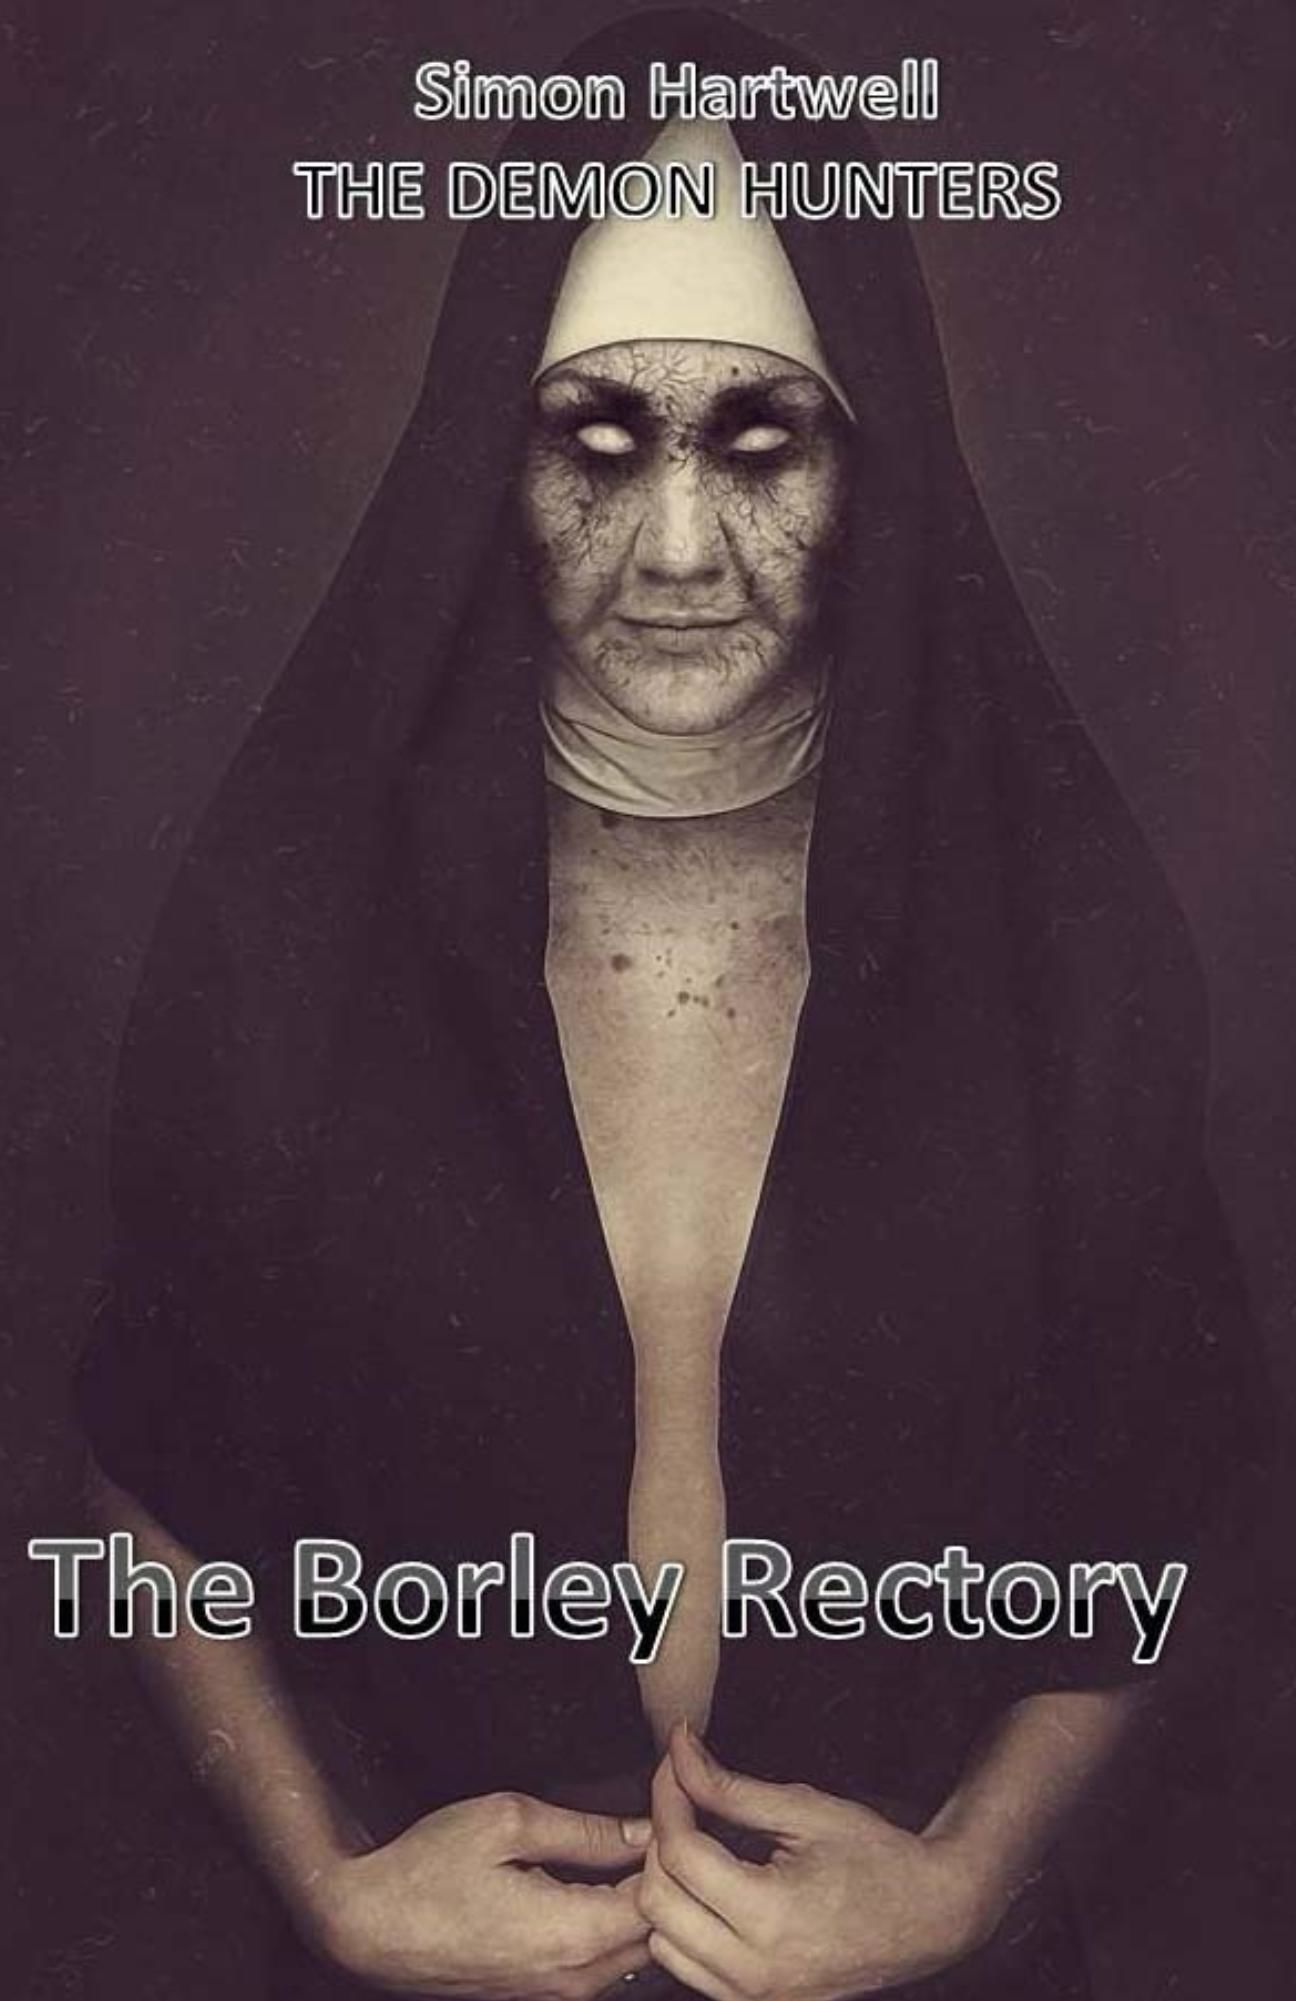 THE DEMON HUNTERS: THE BORLEY RECTORY